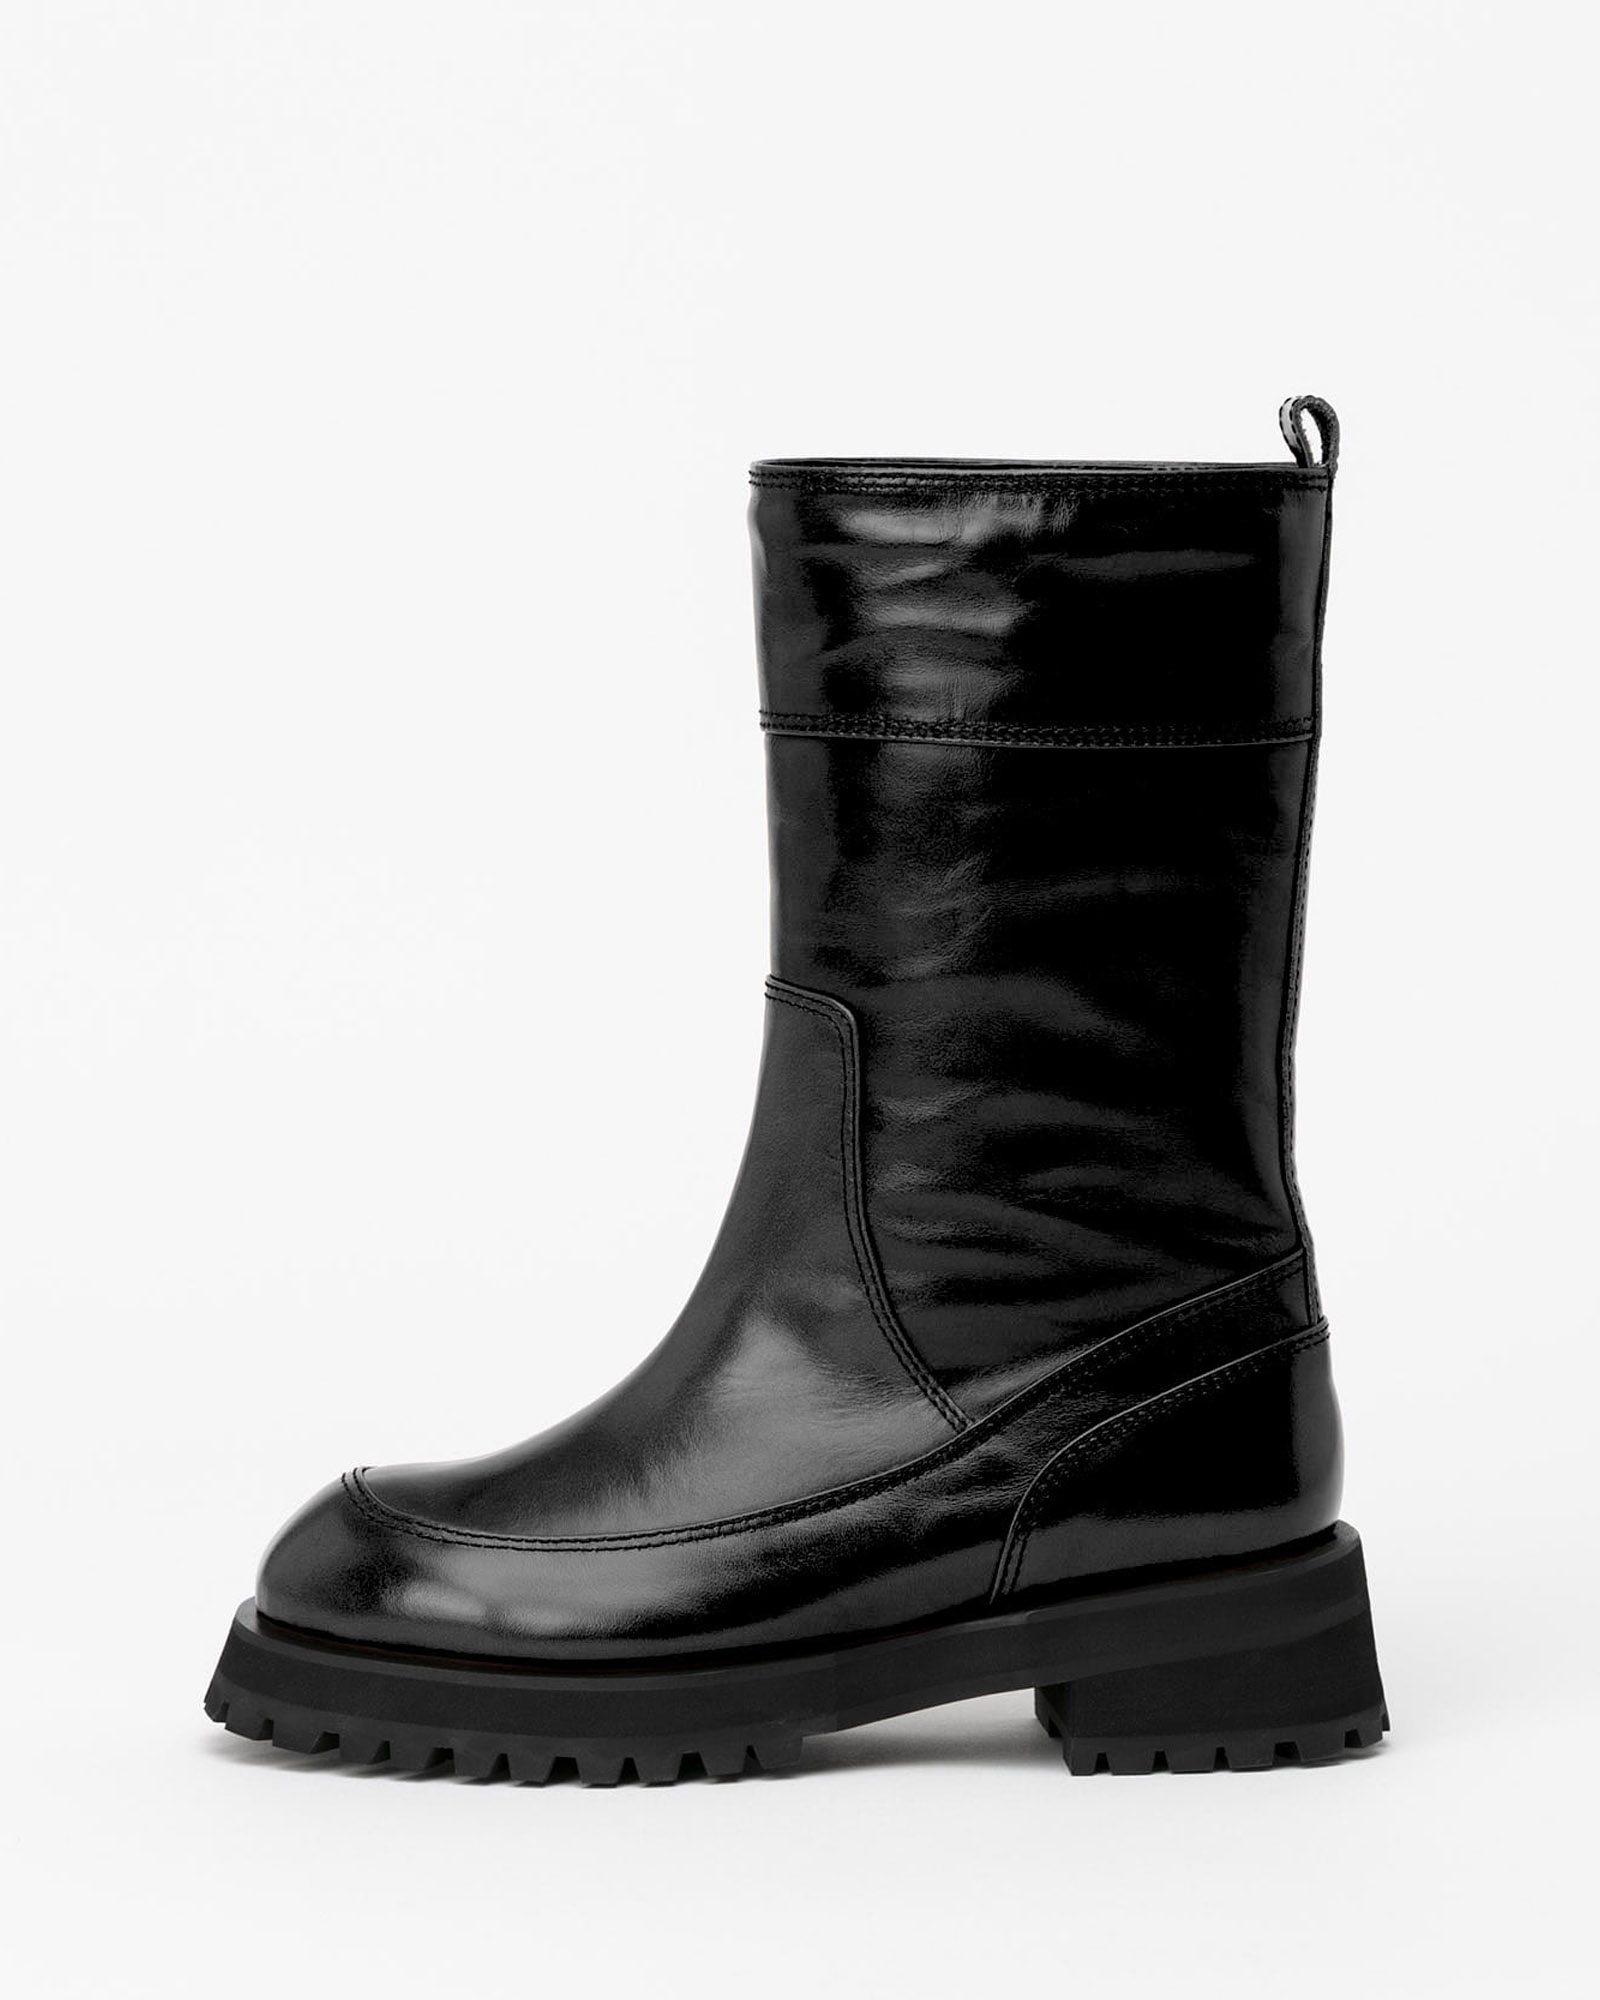 Brica Fur Lining Boots in Textured Black